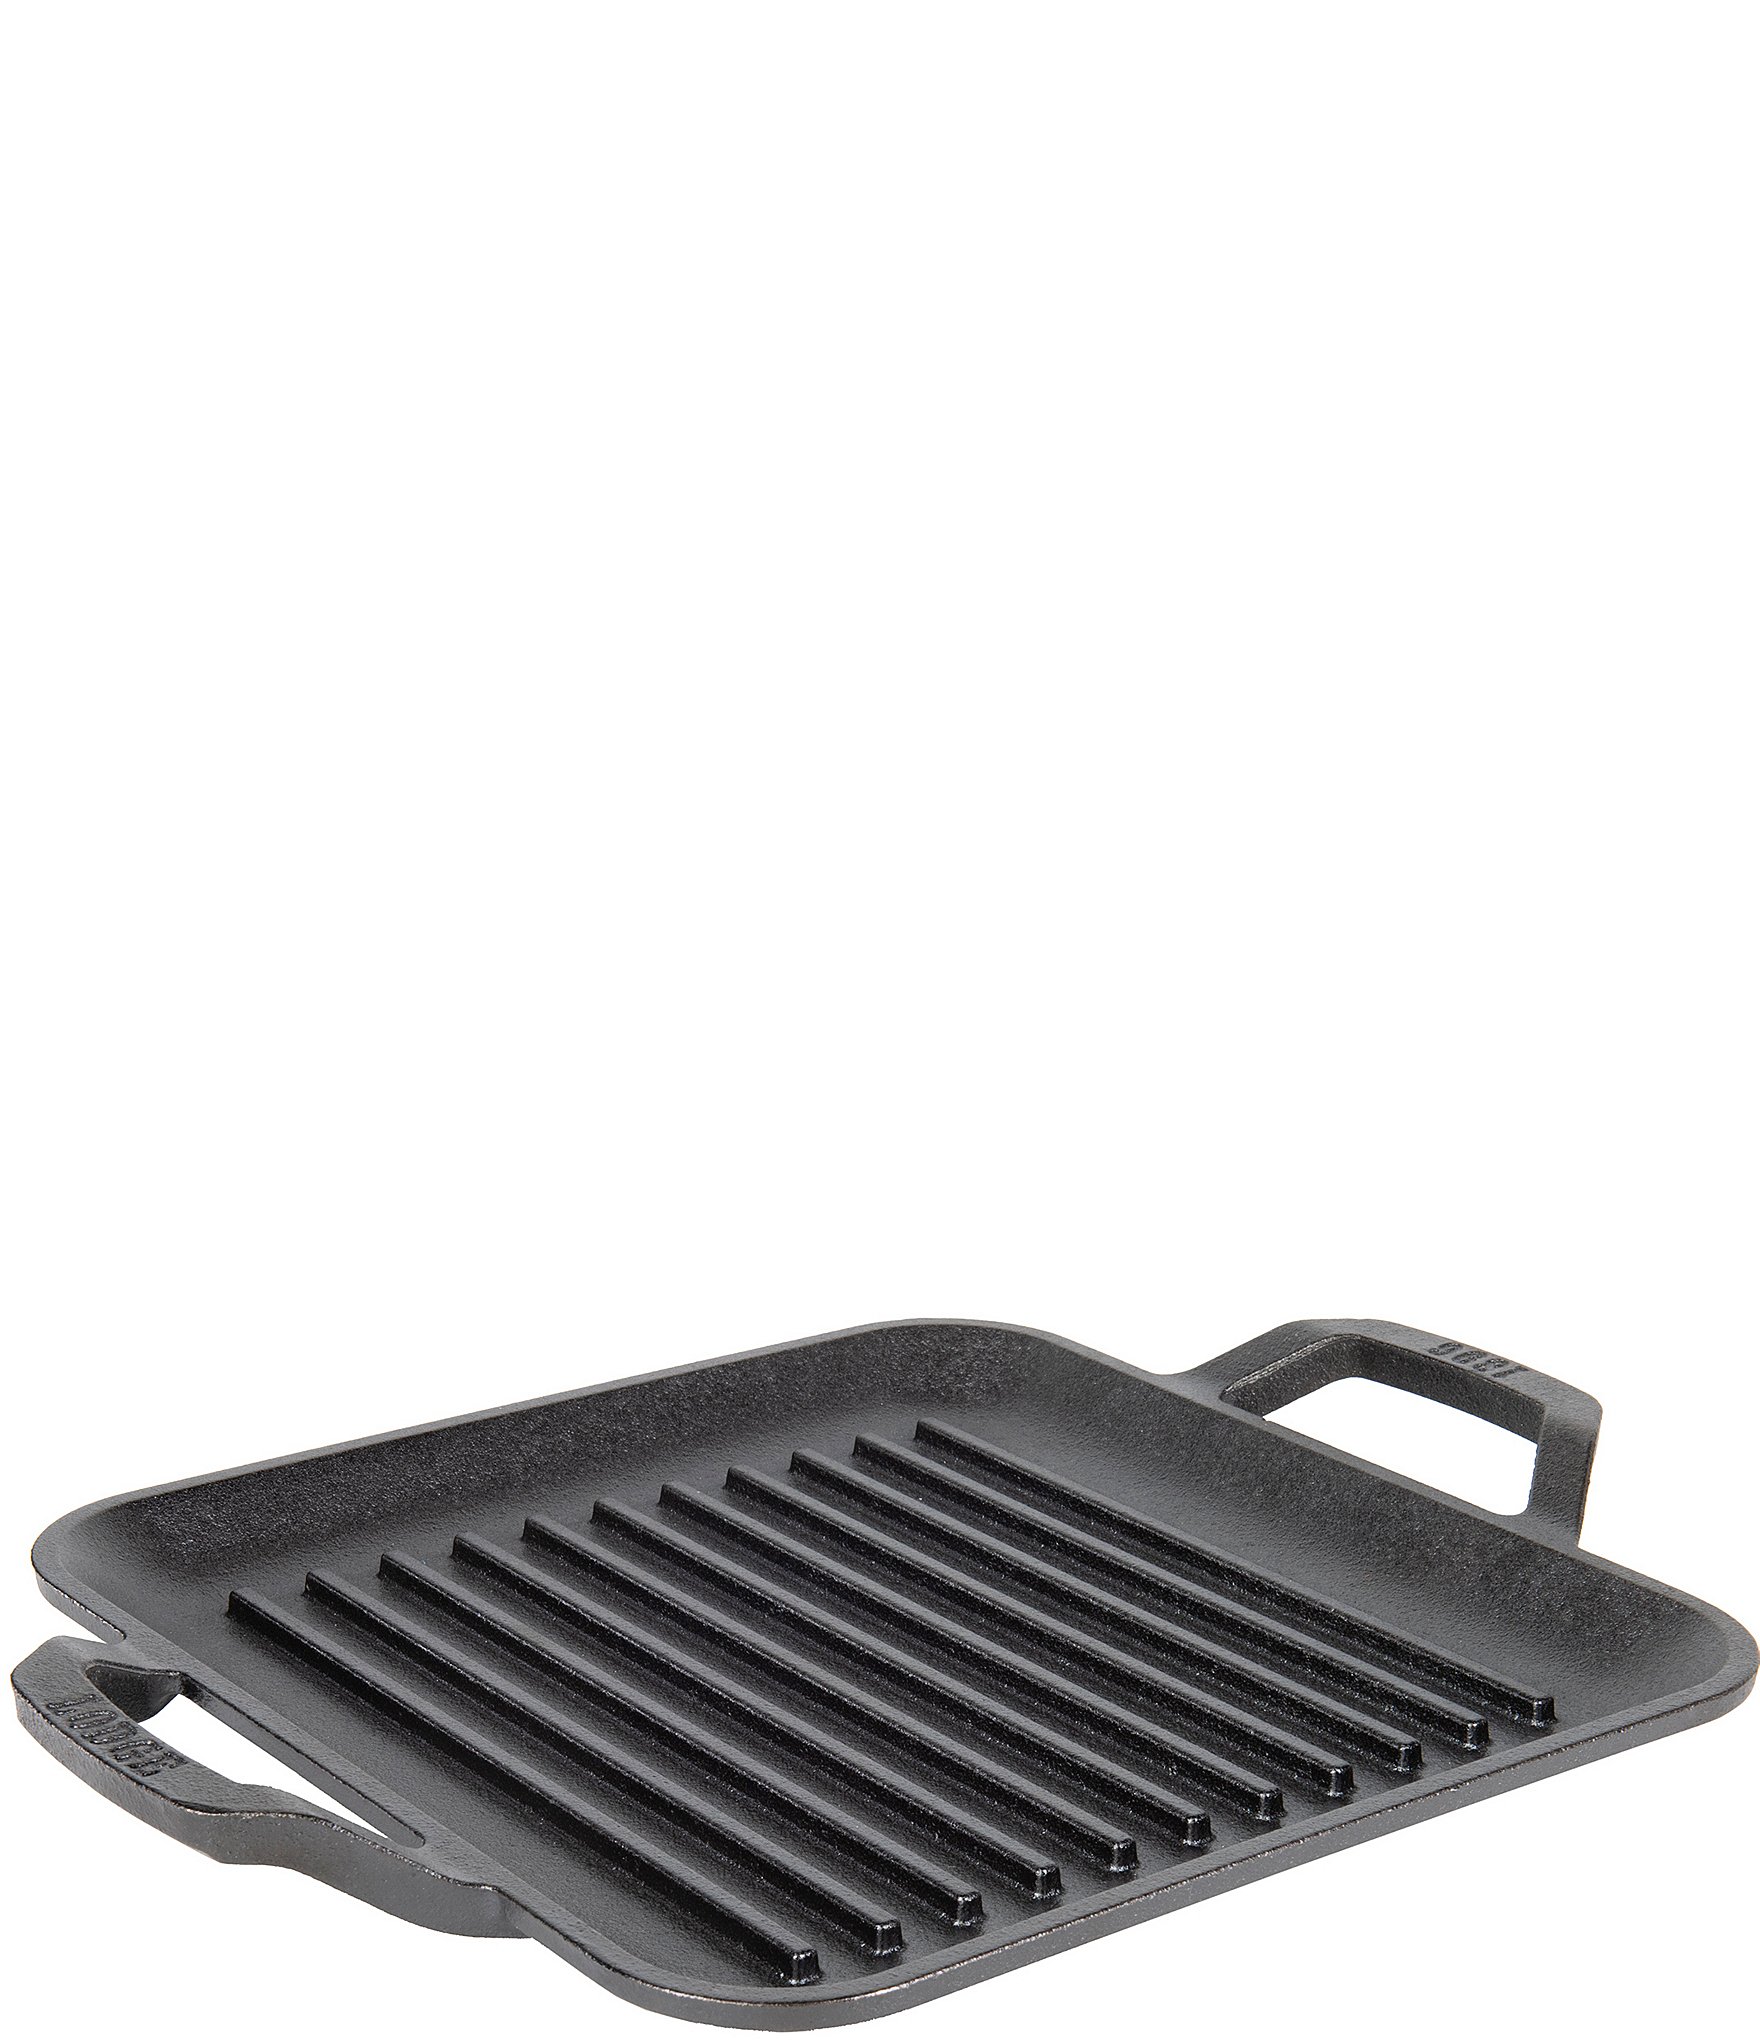 https://dimg.dillards.com/is/image/DillardsZoom/zoom/lodge-cast-iron-chef-collection-11-inch-square-grill-pan/05833224_zi.jpg